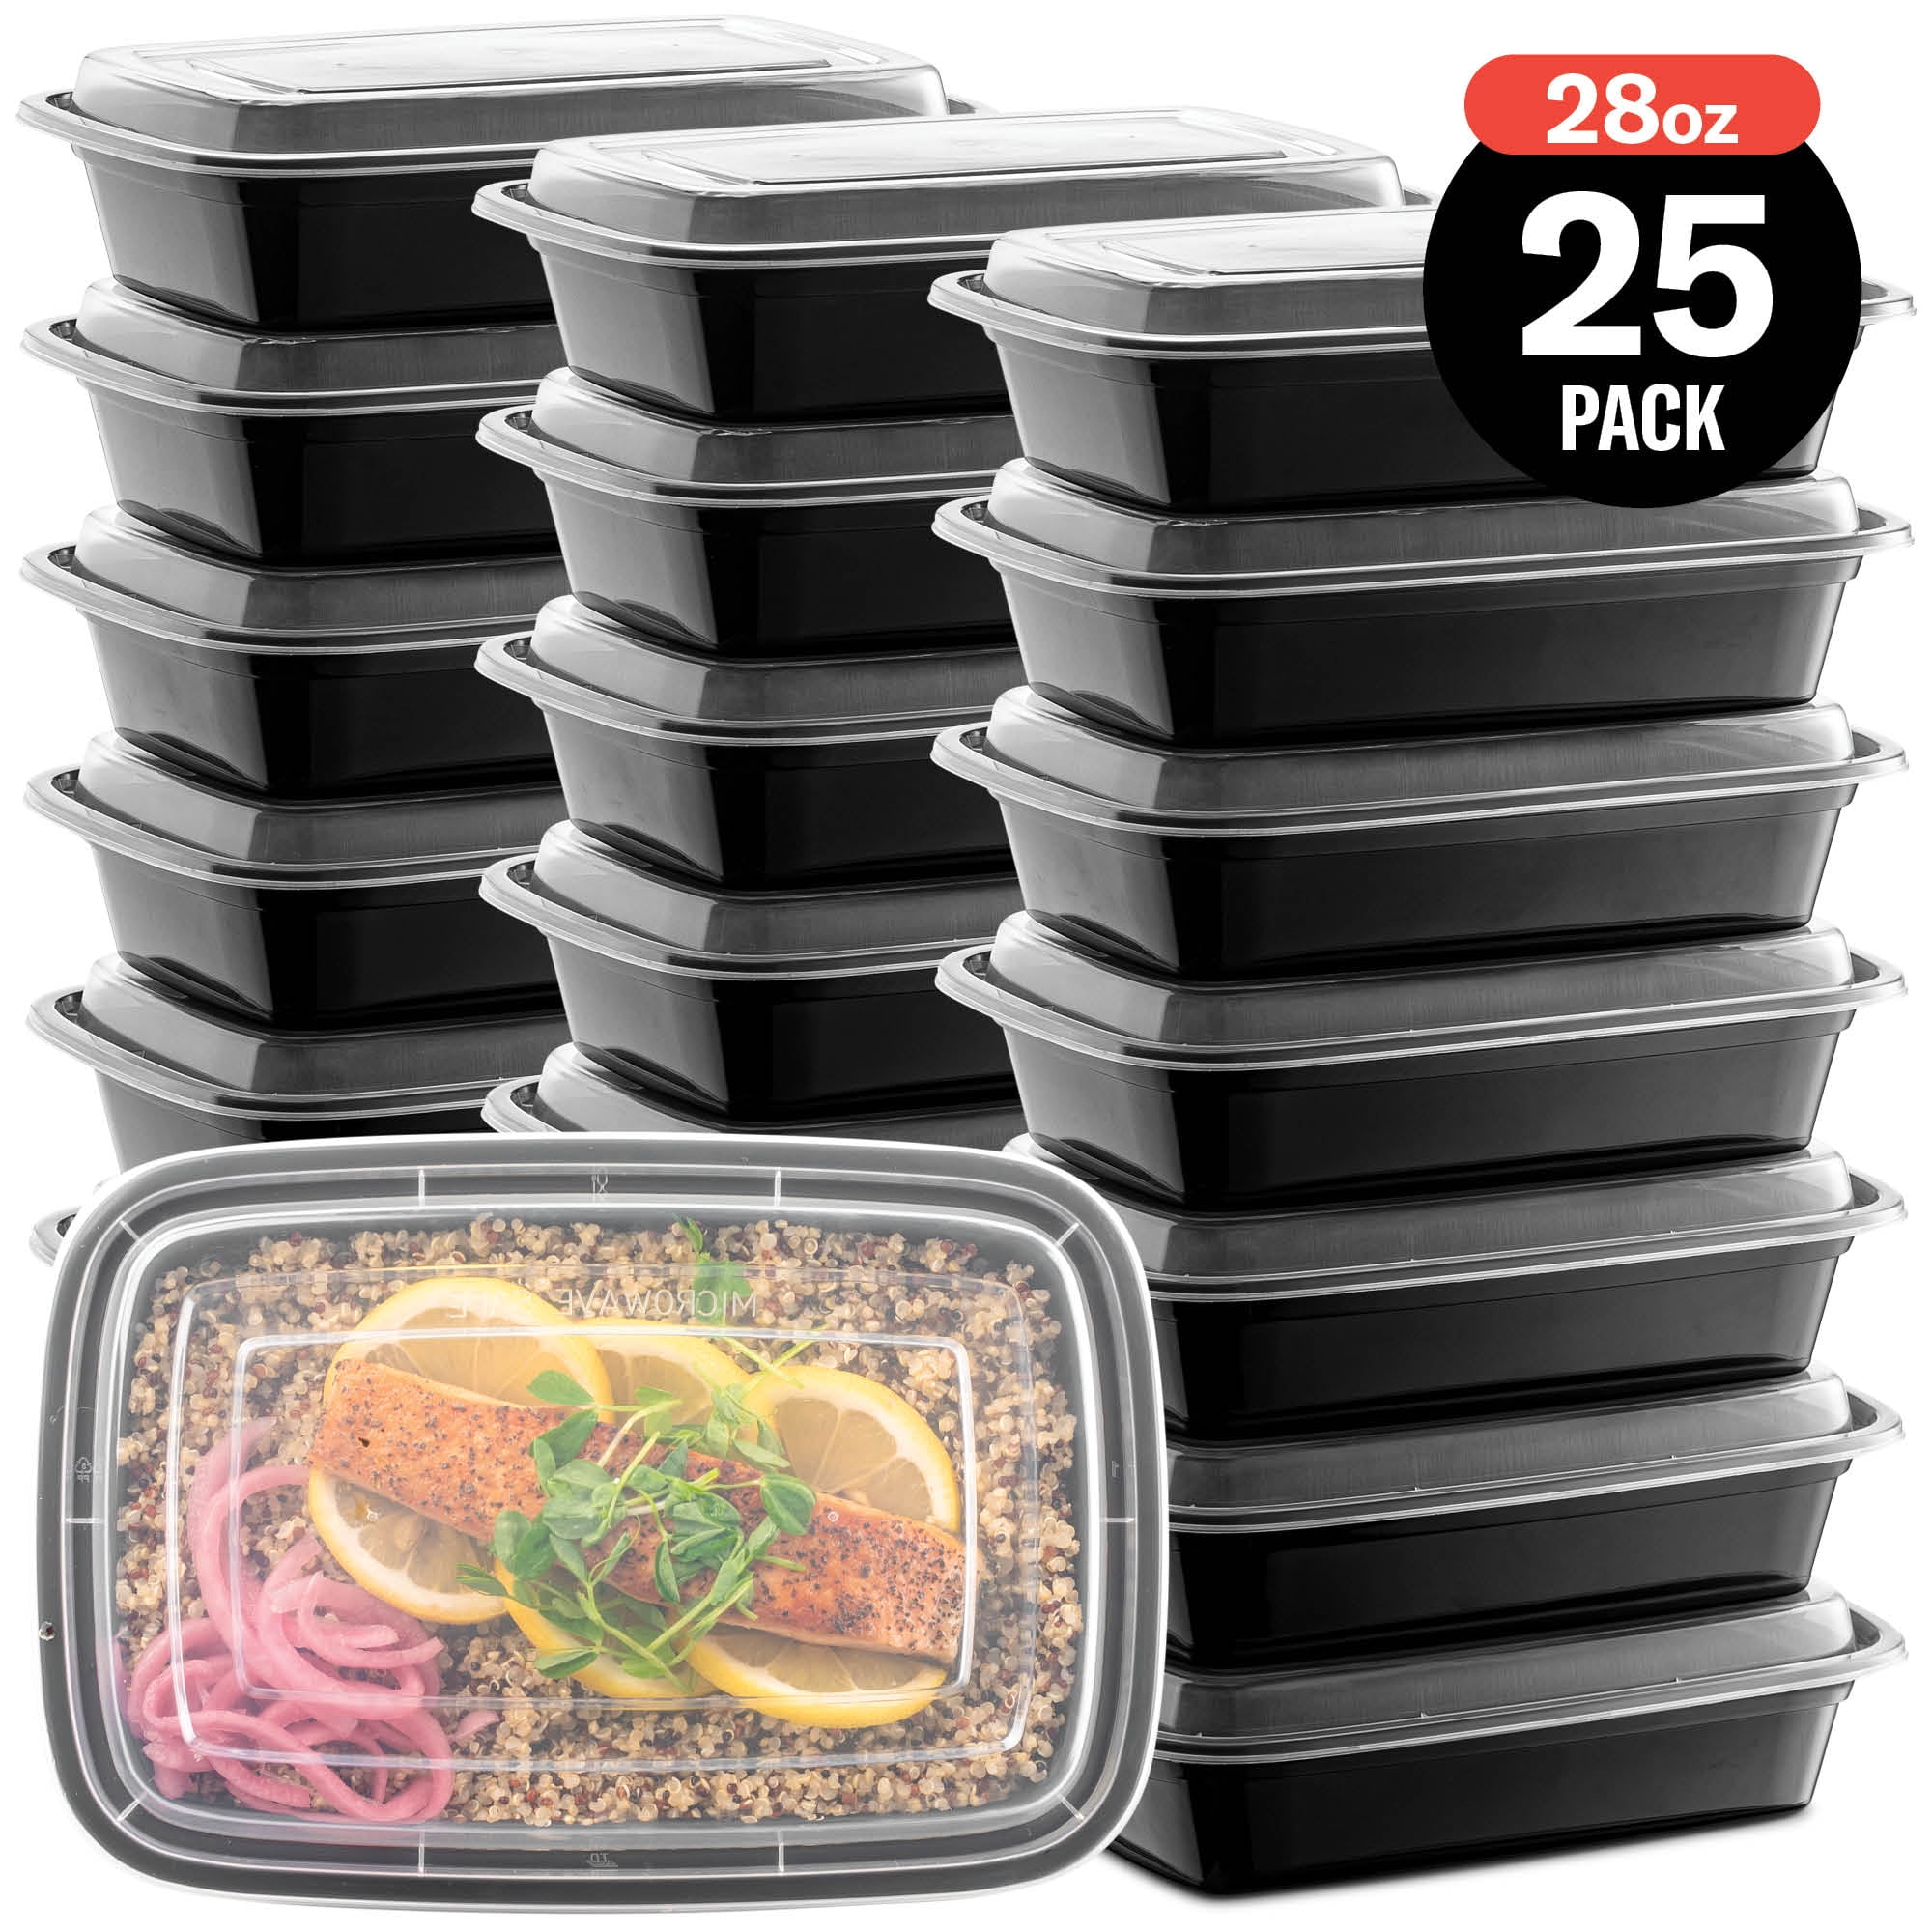  Snap Pak Plastic Food Storage, Meal Prep, Take-Out Delivery  Container Rectangular, 28oz, Black Base/Clear Lid, 28oz.: Home & Kitchen